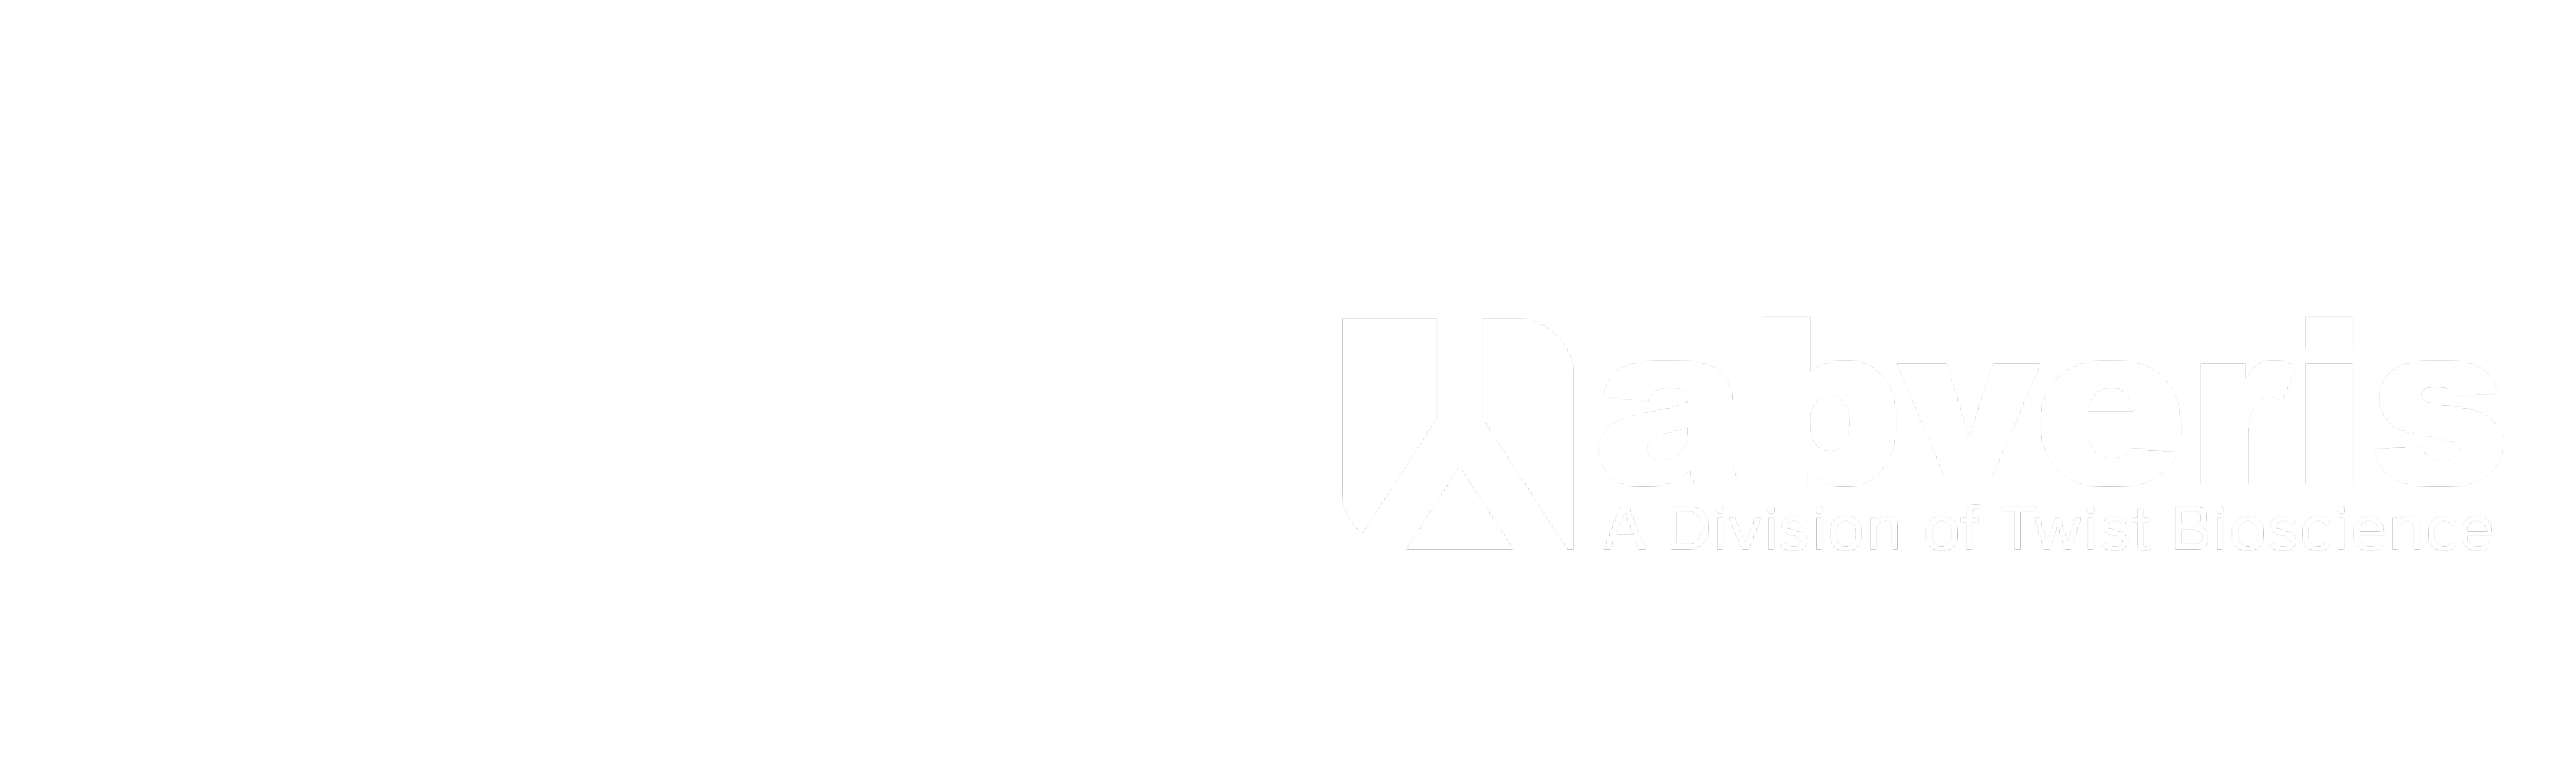 Twist and Abveris logos White side by side -1